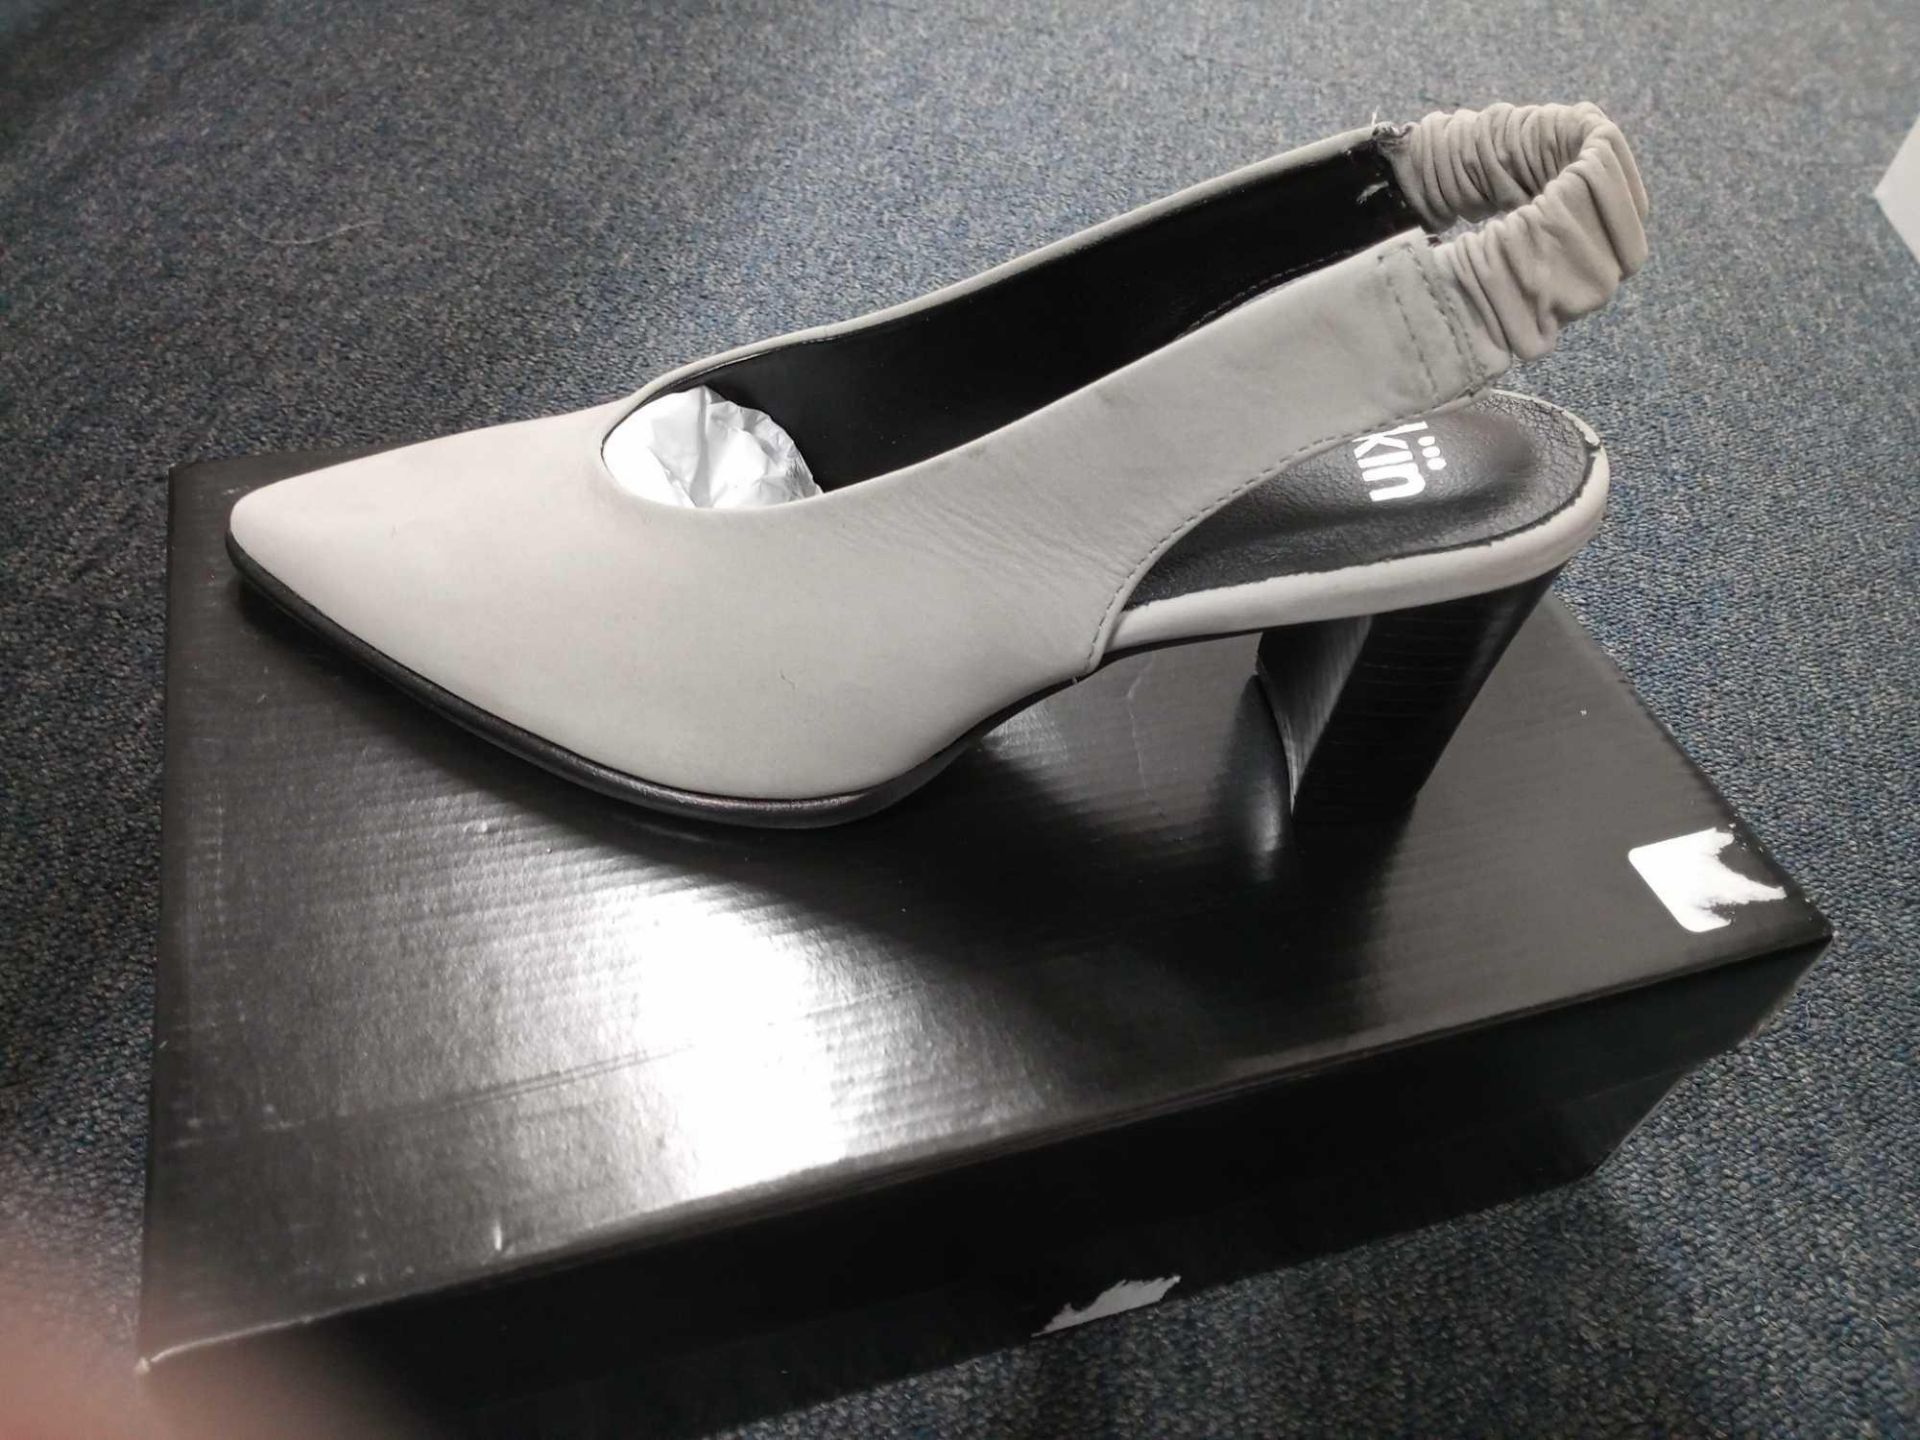 Ladies Kin Grey Heeled Sling Back Shoe Size 38 (5) (1425703)(Appraisals Available Upon Request) (Pic - Image 2 of 3